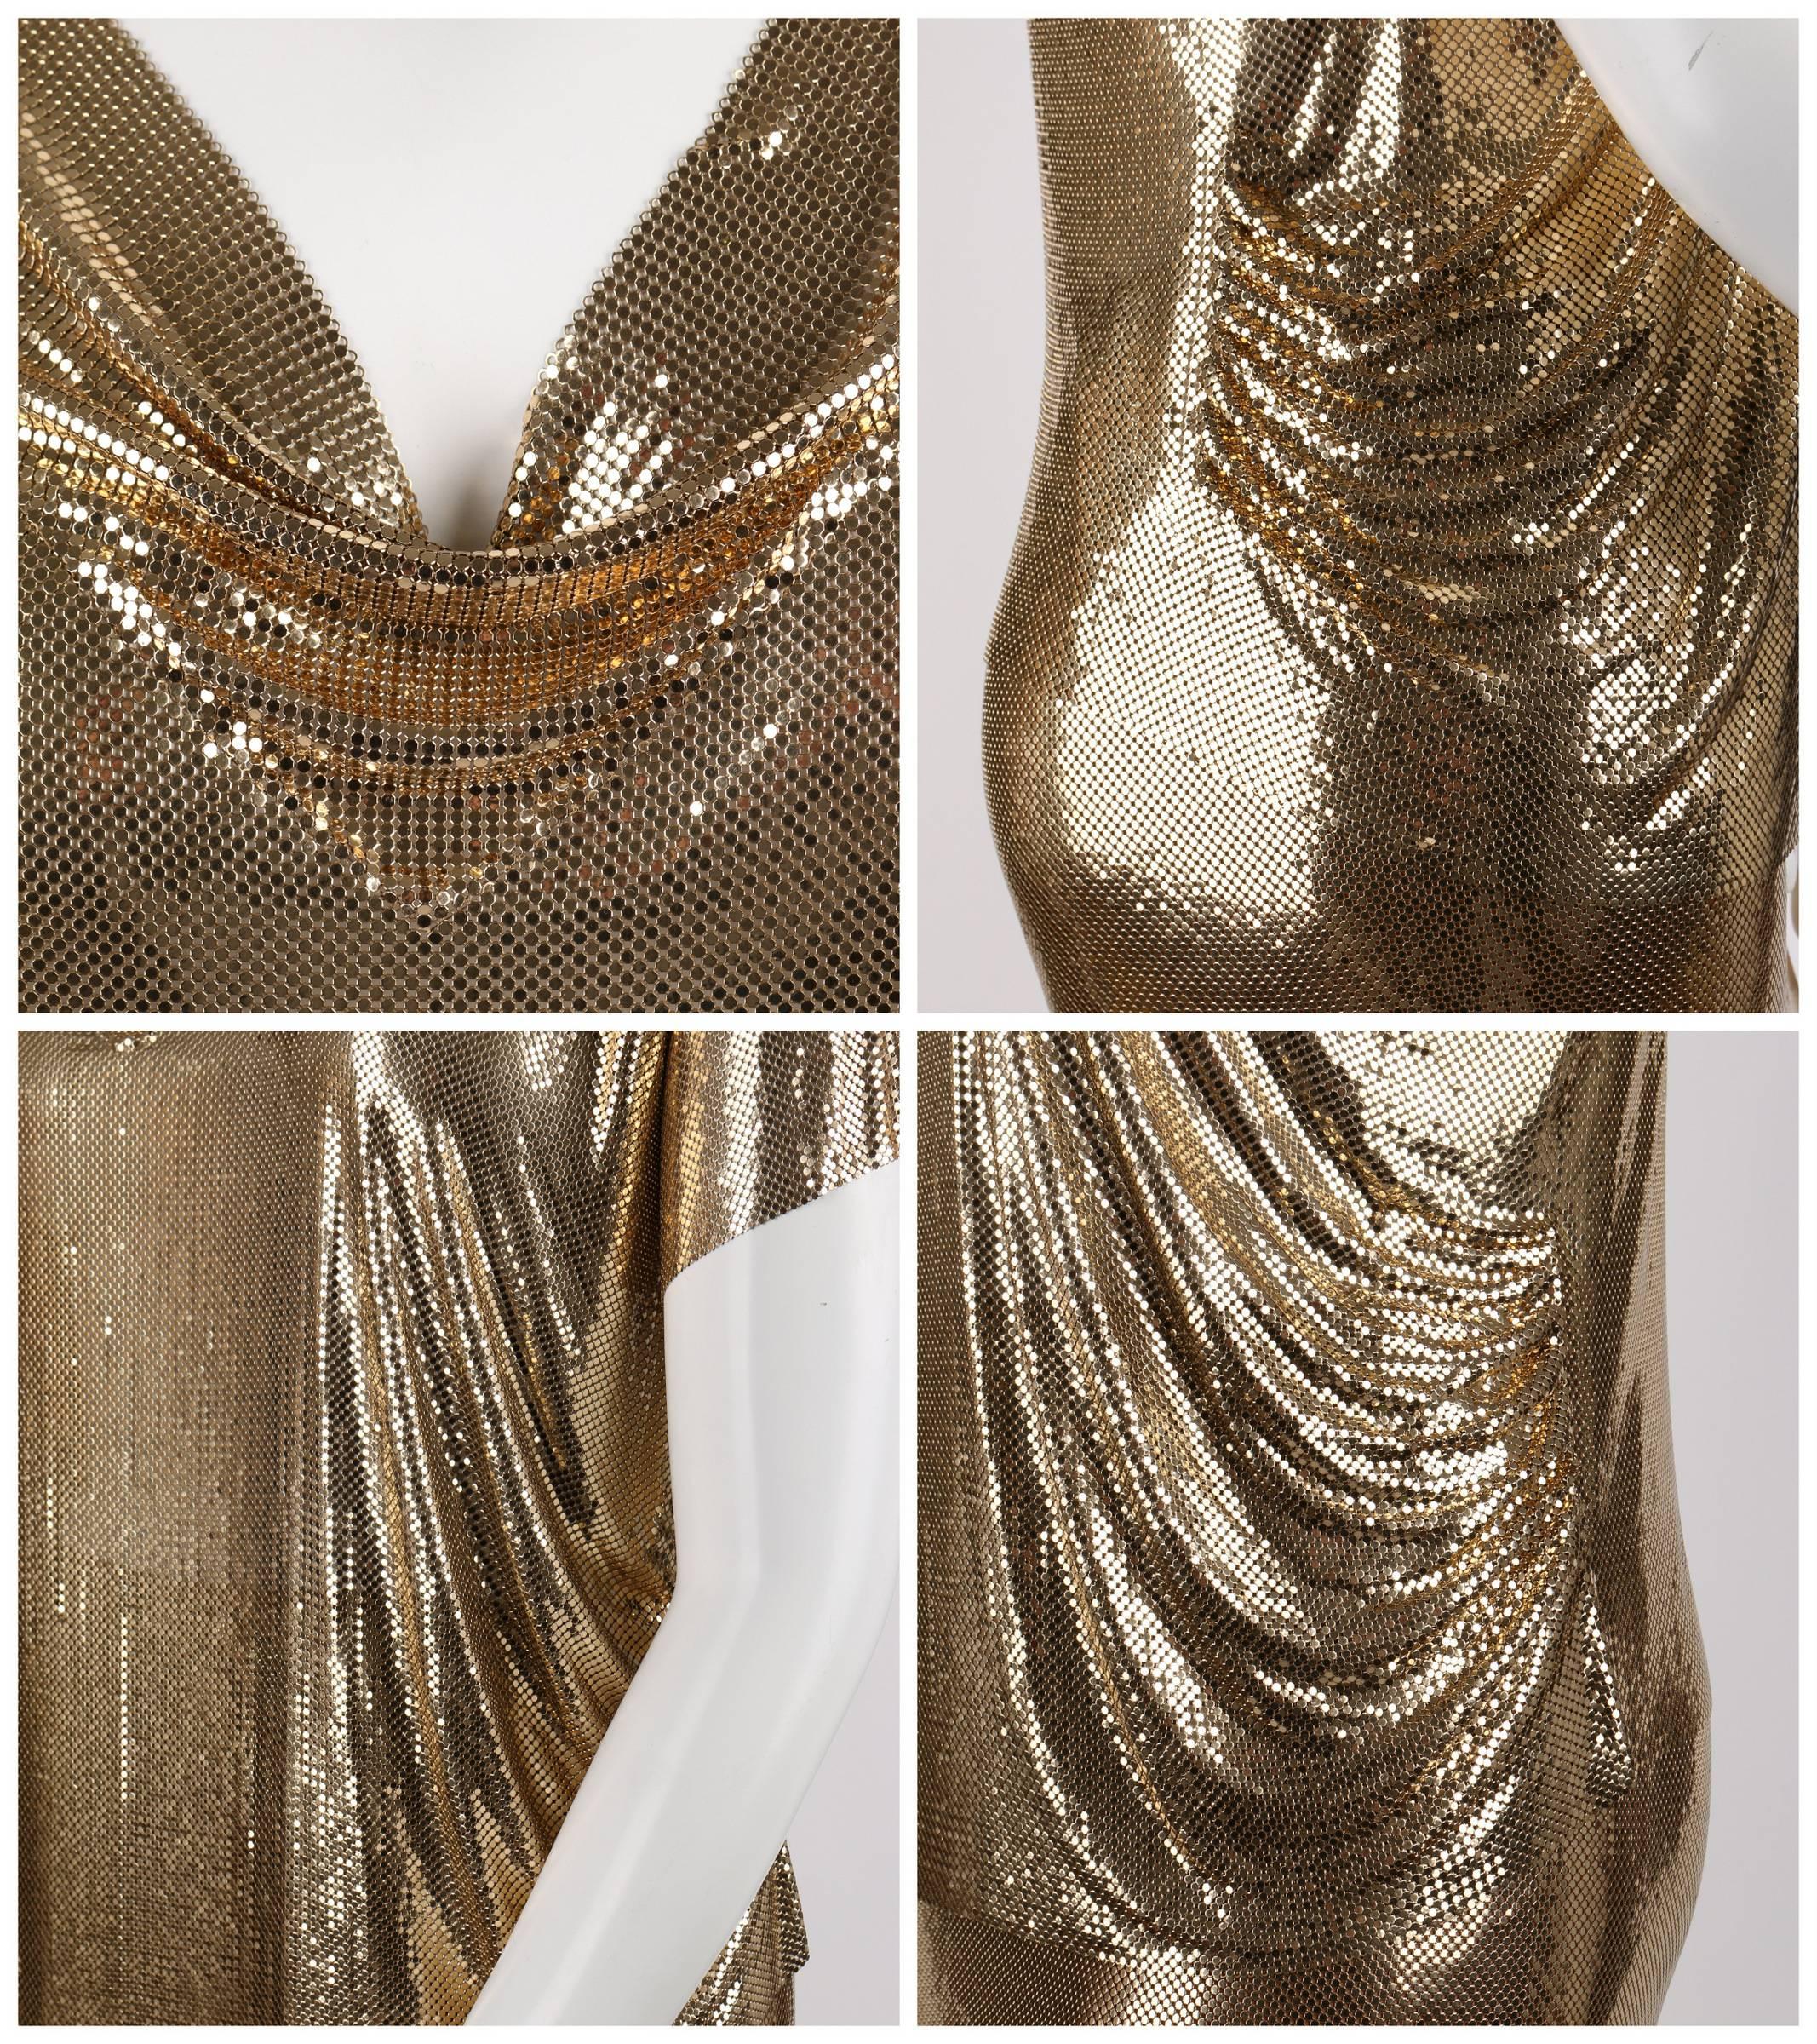 Women's WHITING AND DAVIS c.1970's Gold Metal Mesh Cowl Neck Top Skirt Dress Set Size L